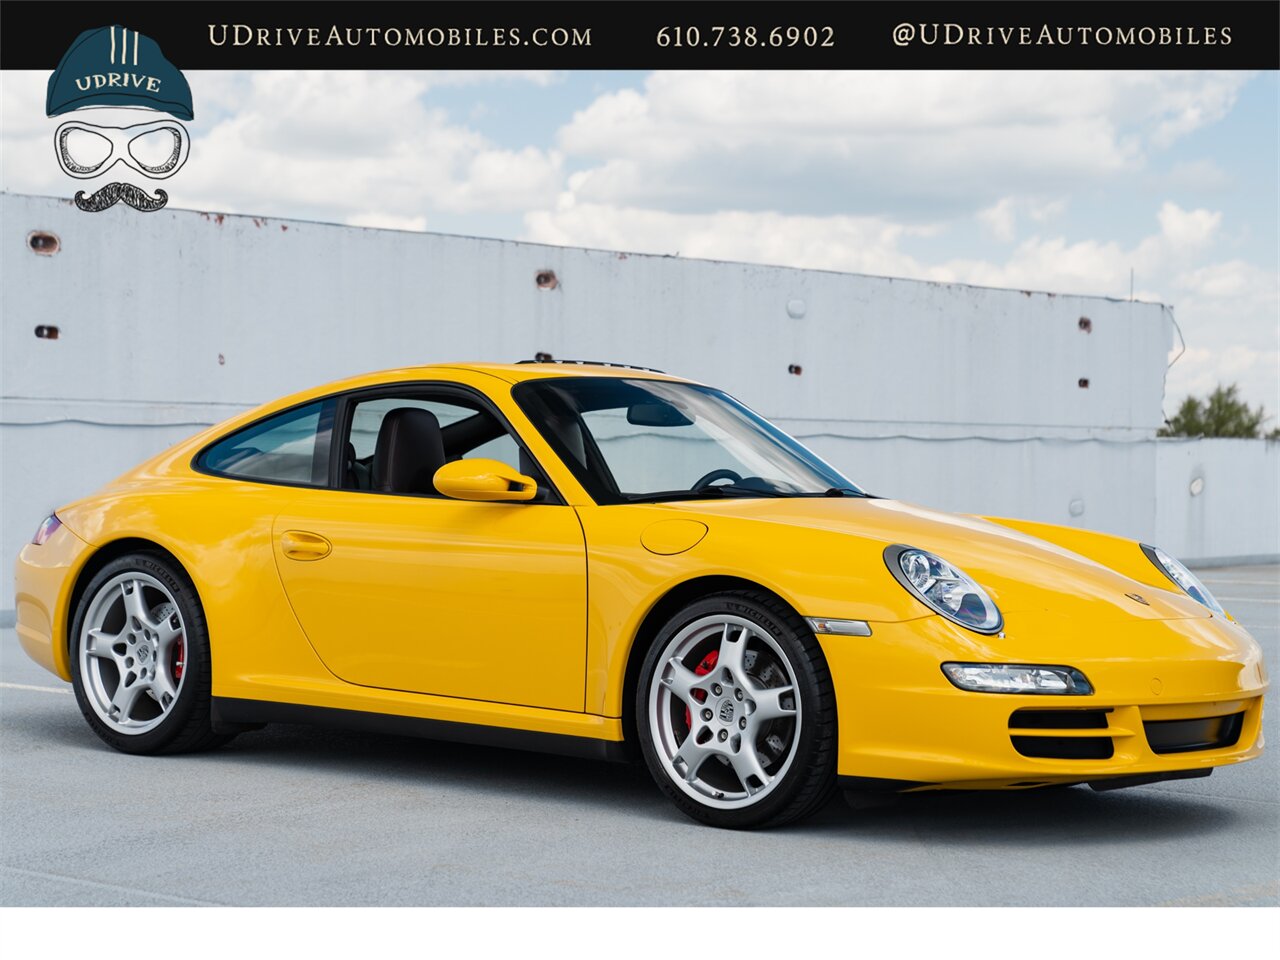 2006 Porsche 911 Carrera 4S  997 C4S 6 Speed Cocoa Full Lthr Chrono Sport Exhaust Special Color Combo - Photo 15 - West Chester, PA 19382